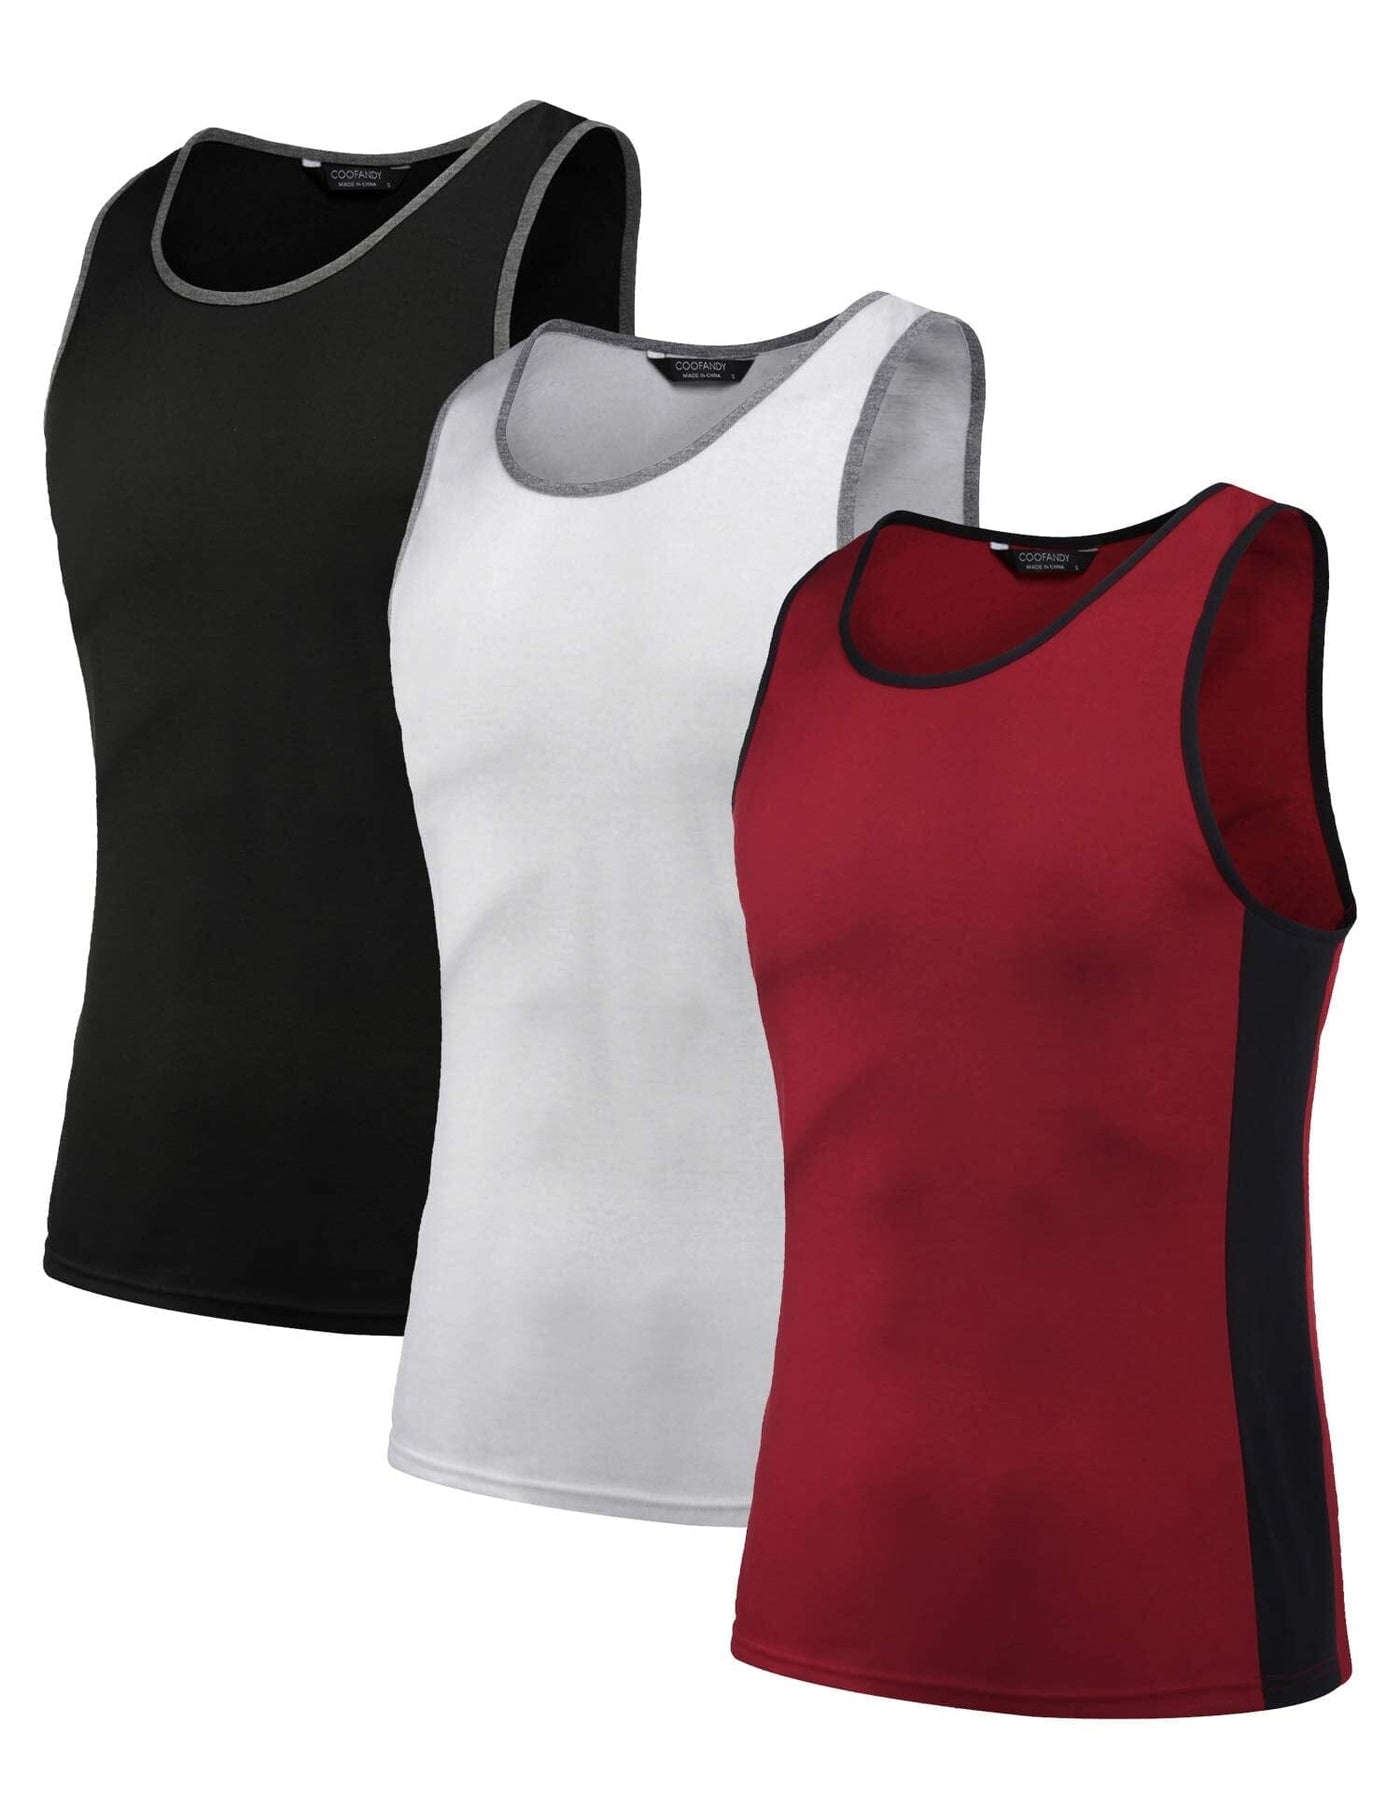 Coofandy 3 Pack Workout Tank Top (US Only) Tank Tops coofandy 